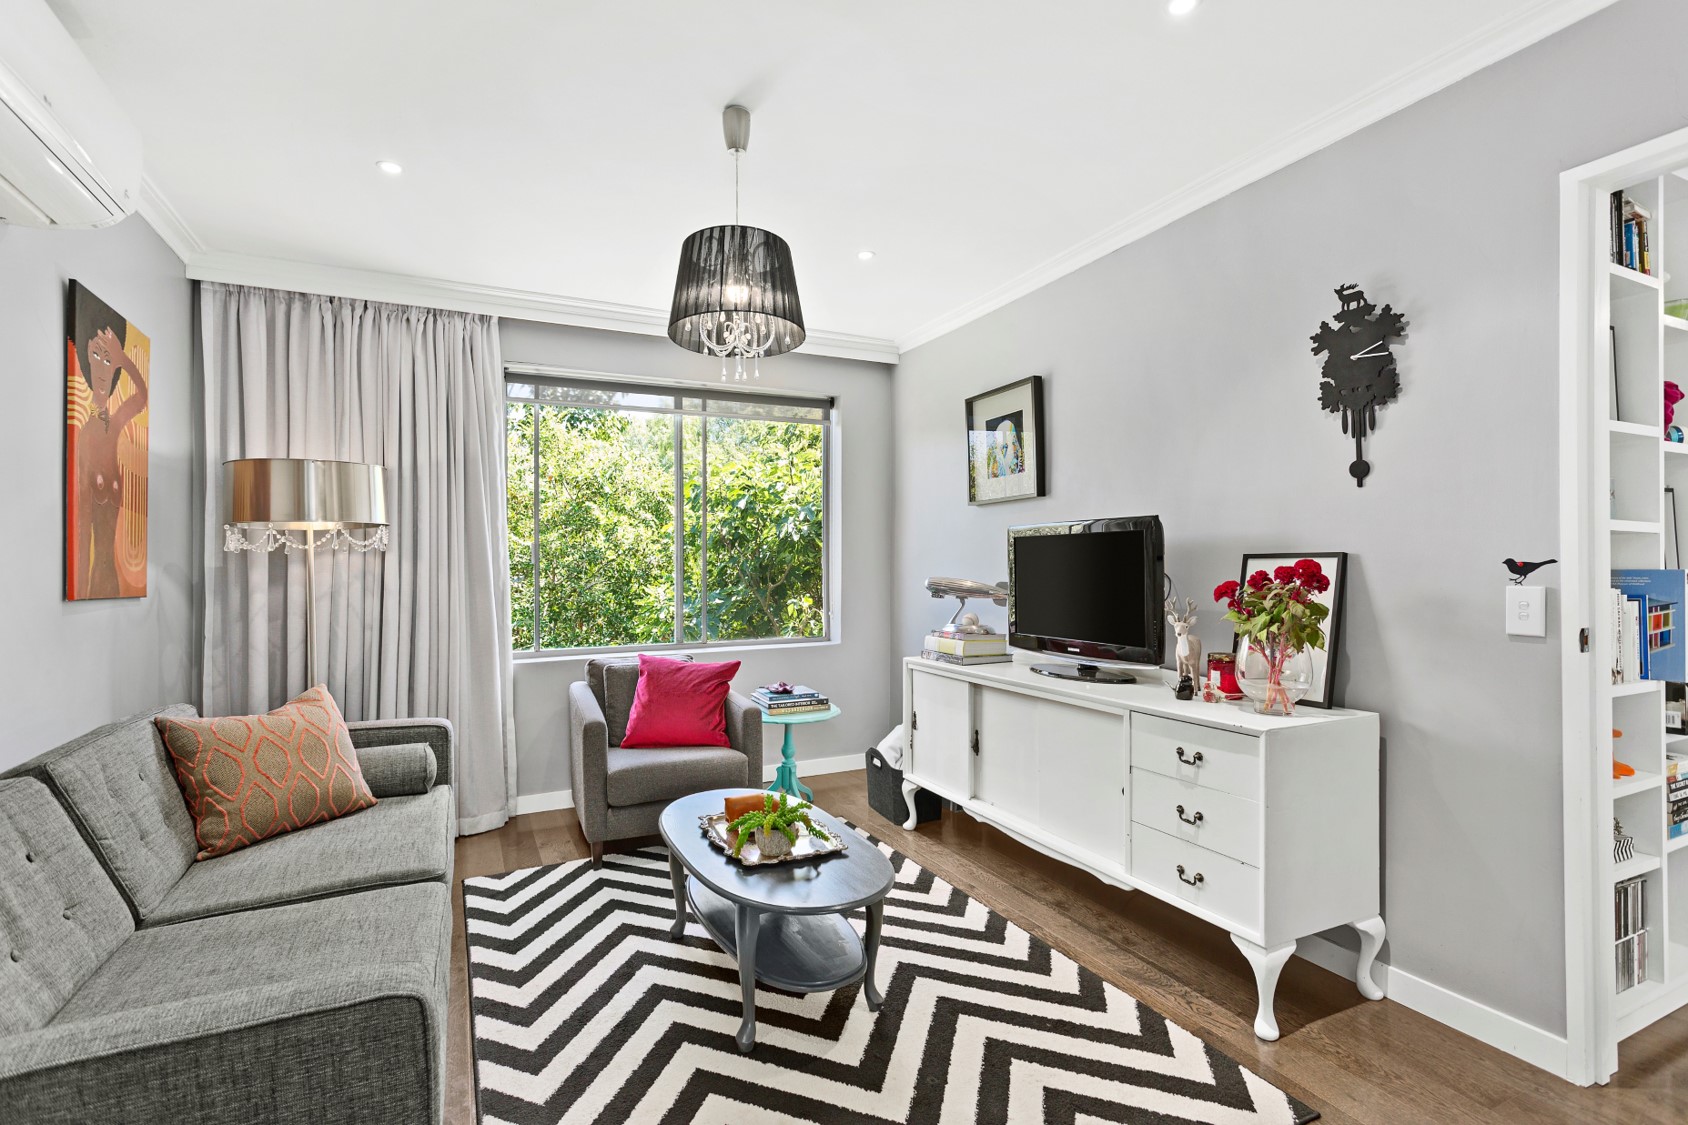 Getting the most out of small spaces - Melbourne Interior Design - Leeder Interiors